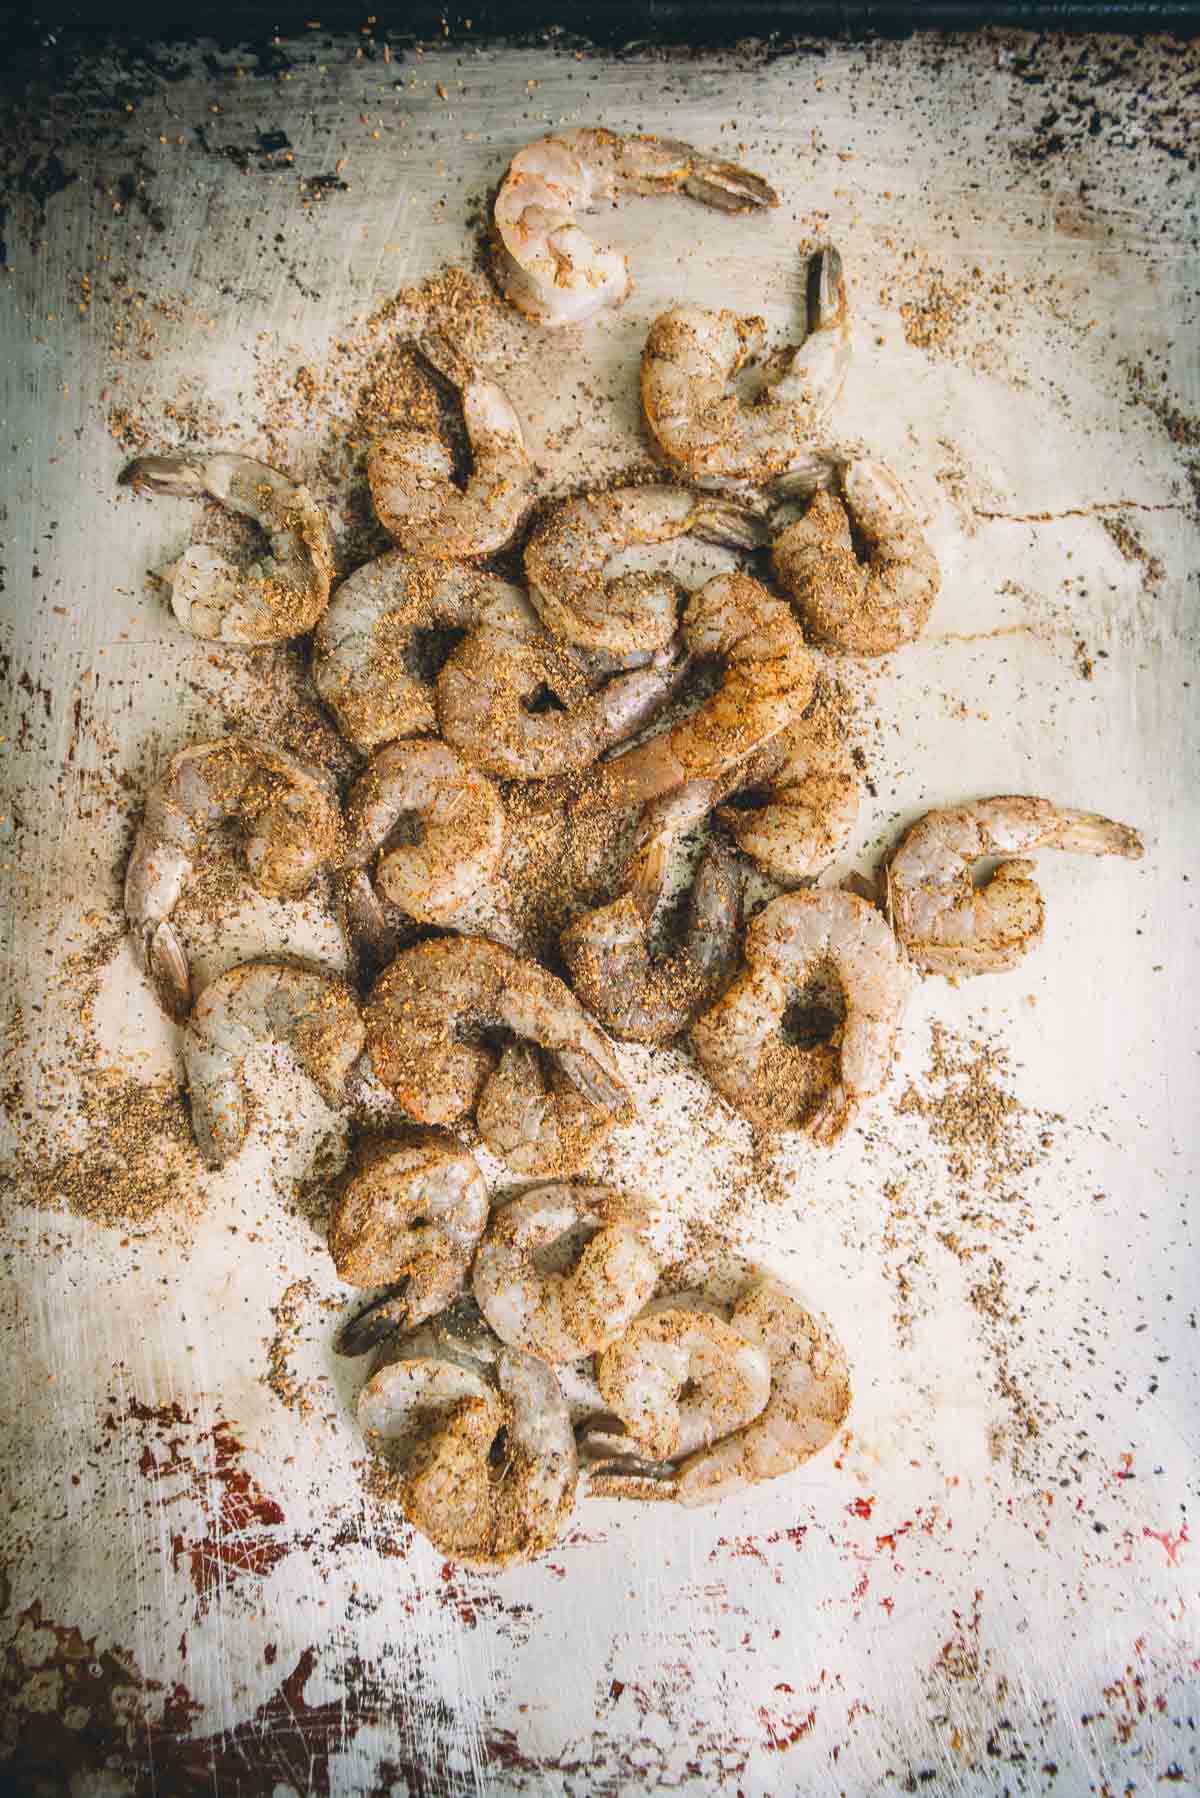 Raw shrimp seasoned with Creole spice blend. 